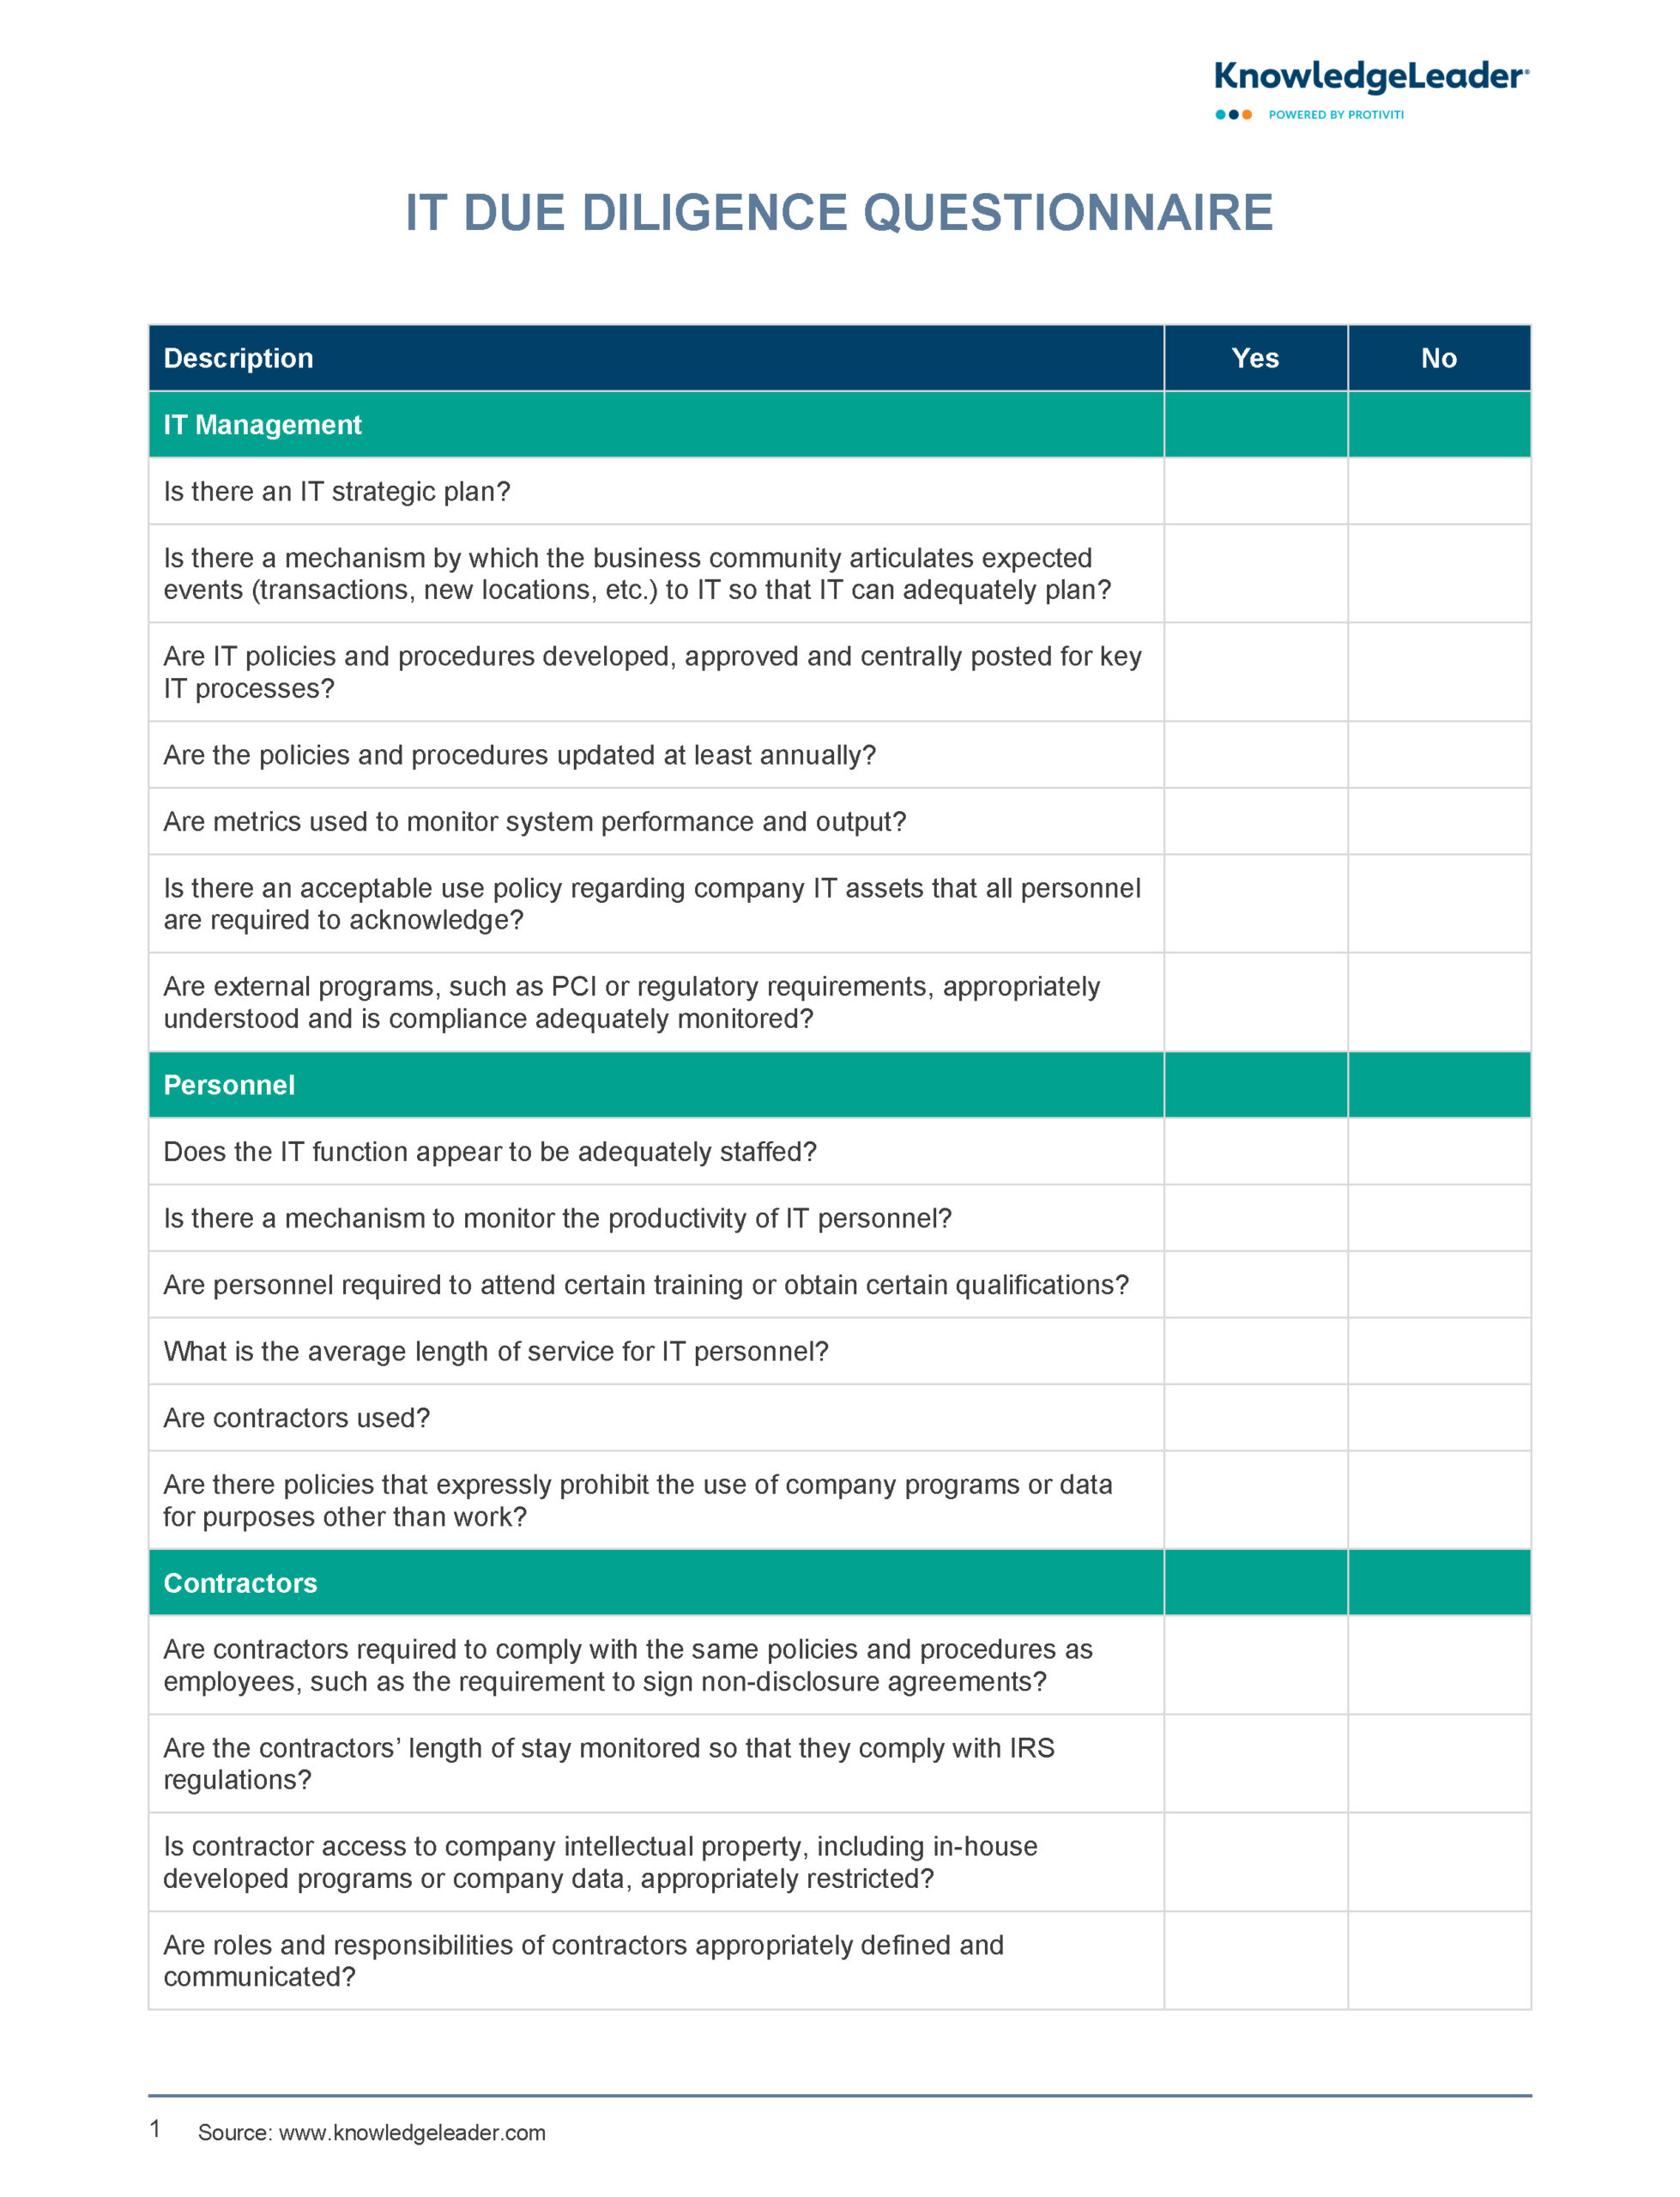 IT Due Diligence Questionnaire  KnowledgeLeader Inside Vendor Due Diligence Report Template